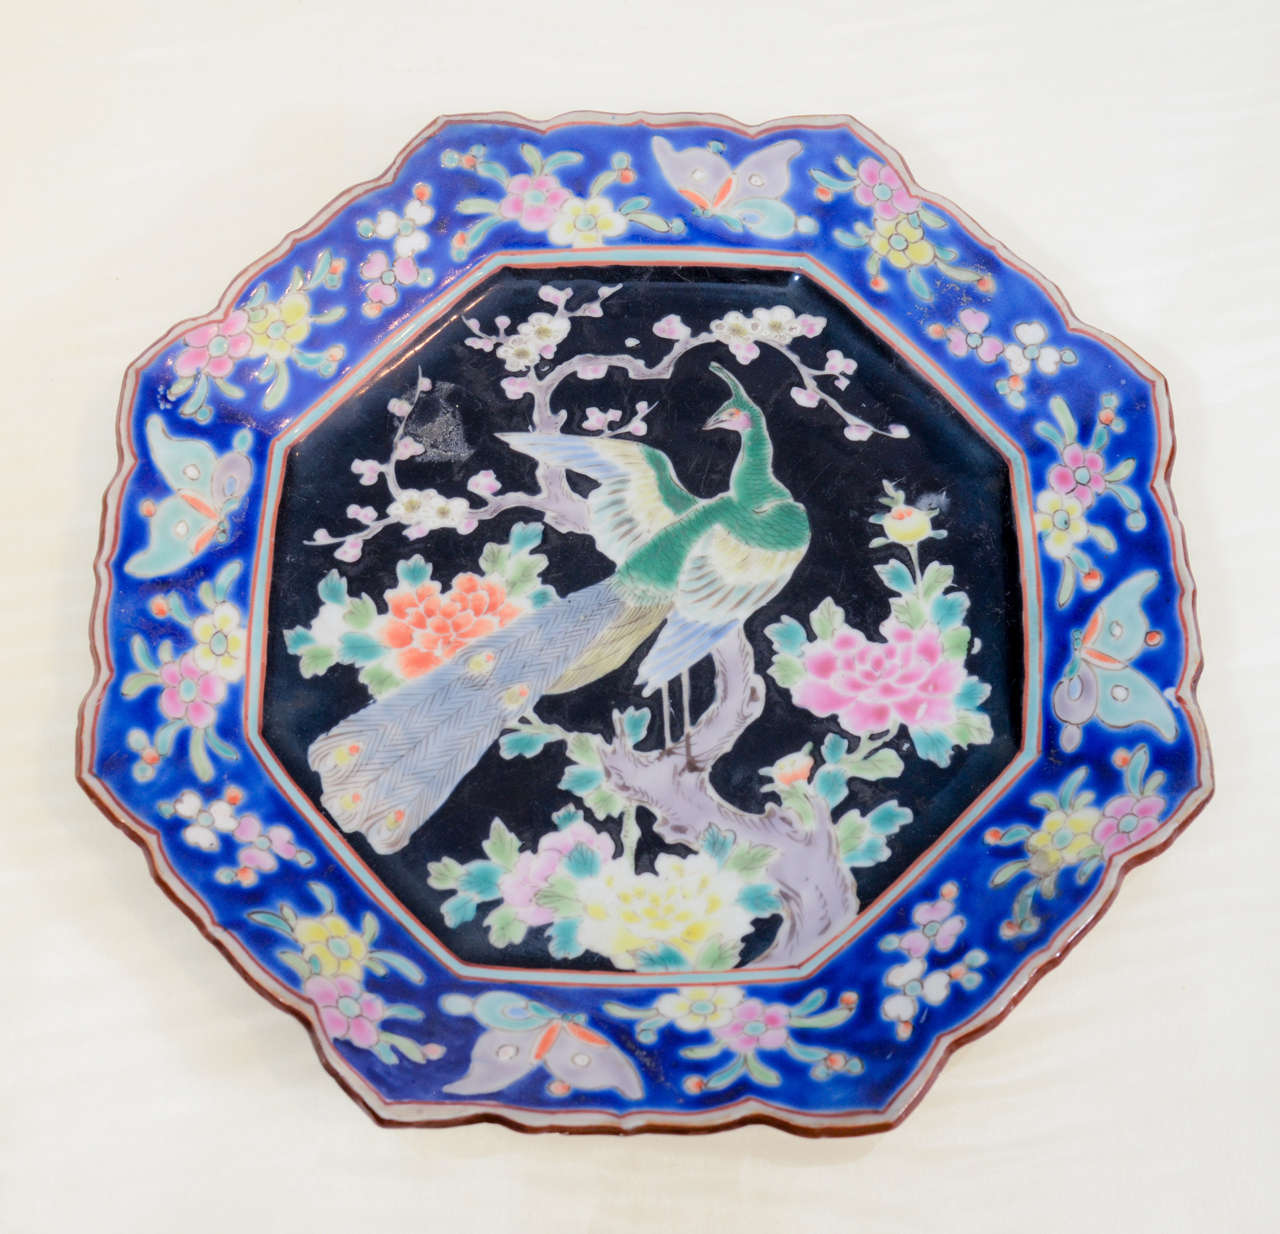 Eight-sided famille noir porcelain plate depicting peacock with blue and pastel decorated border.